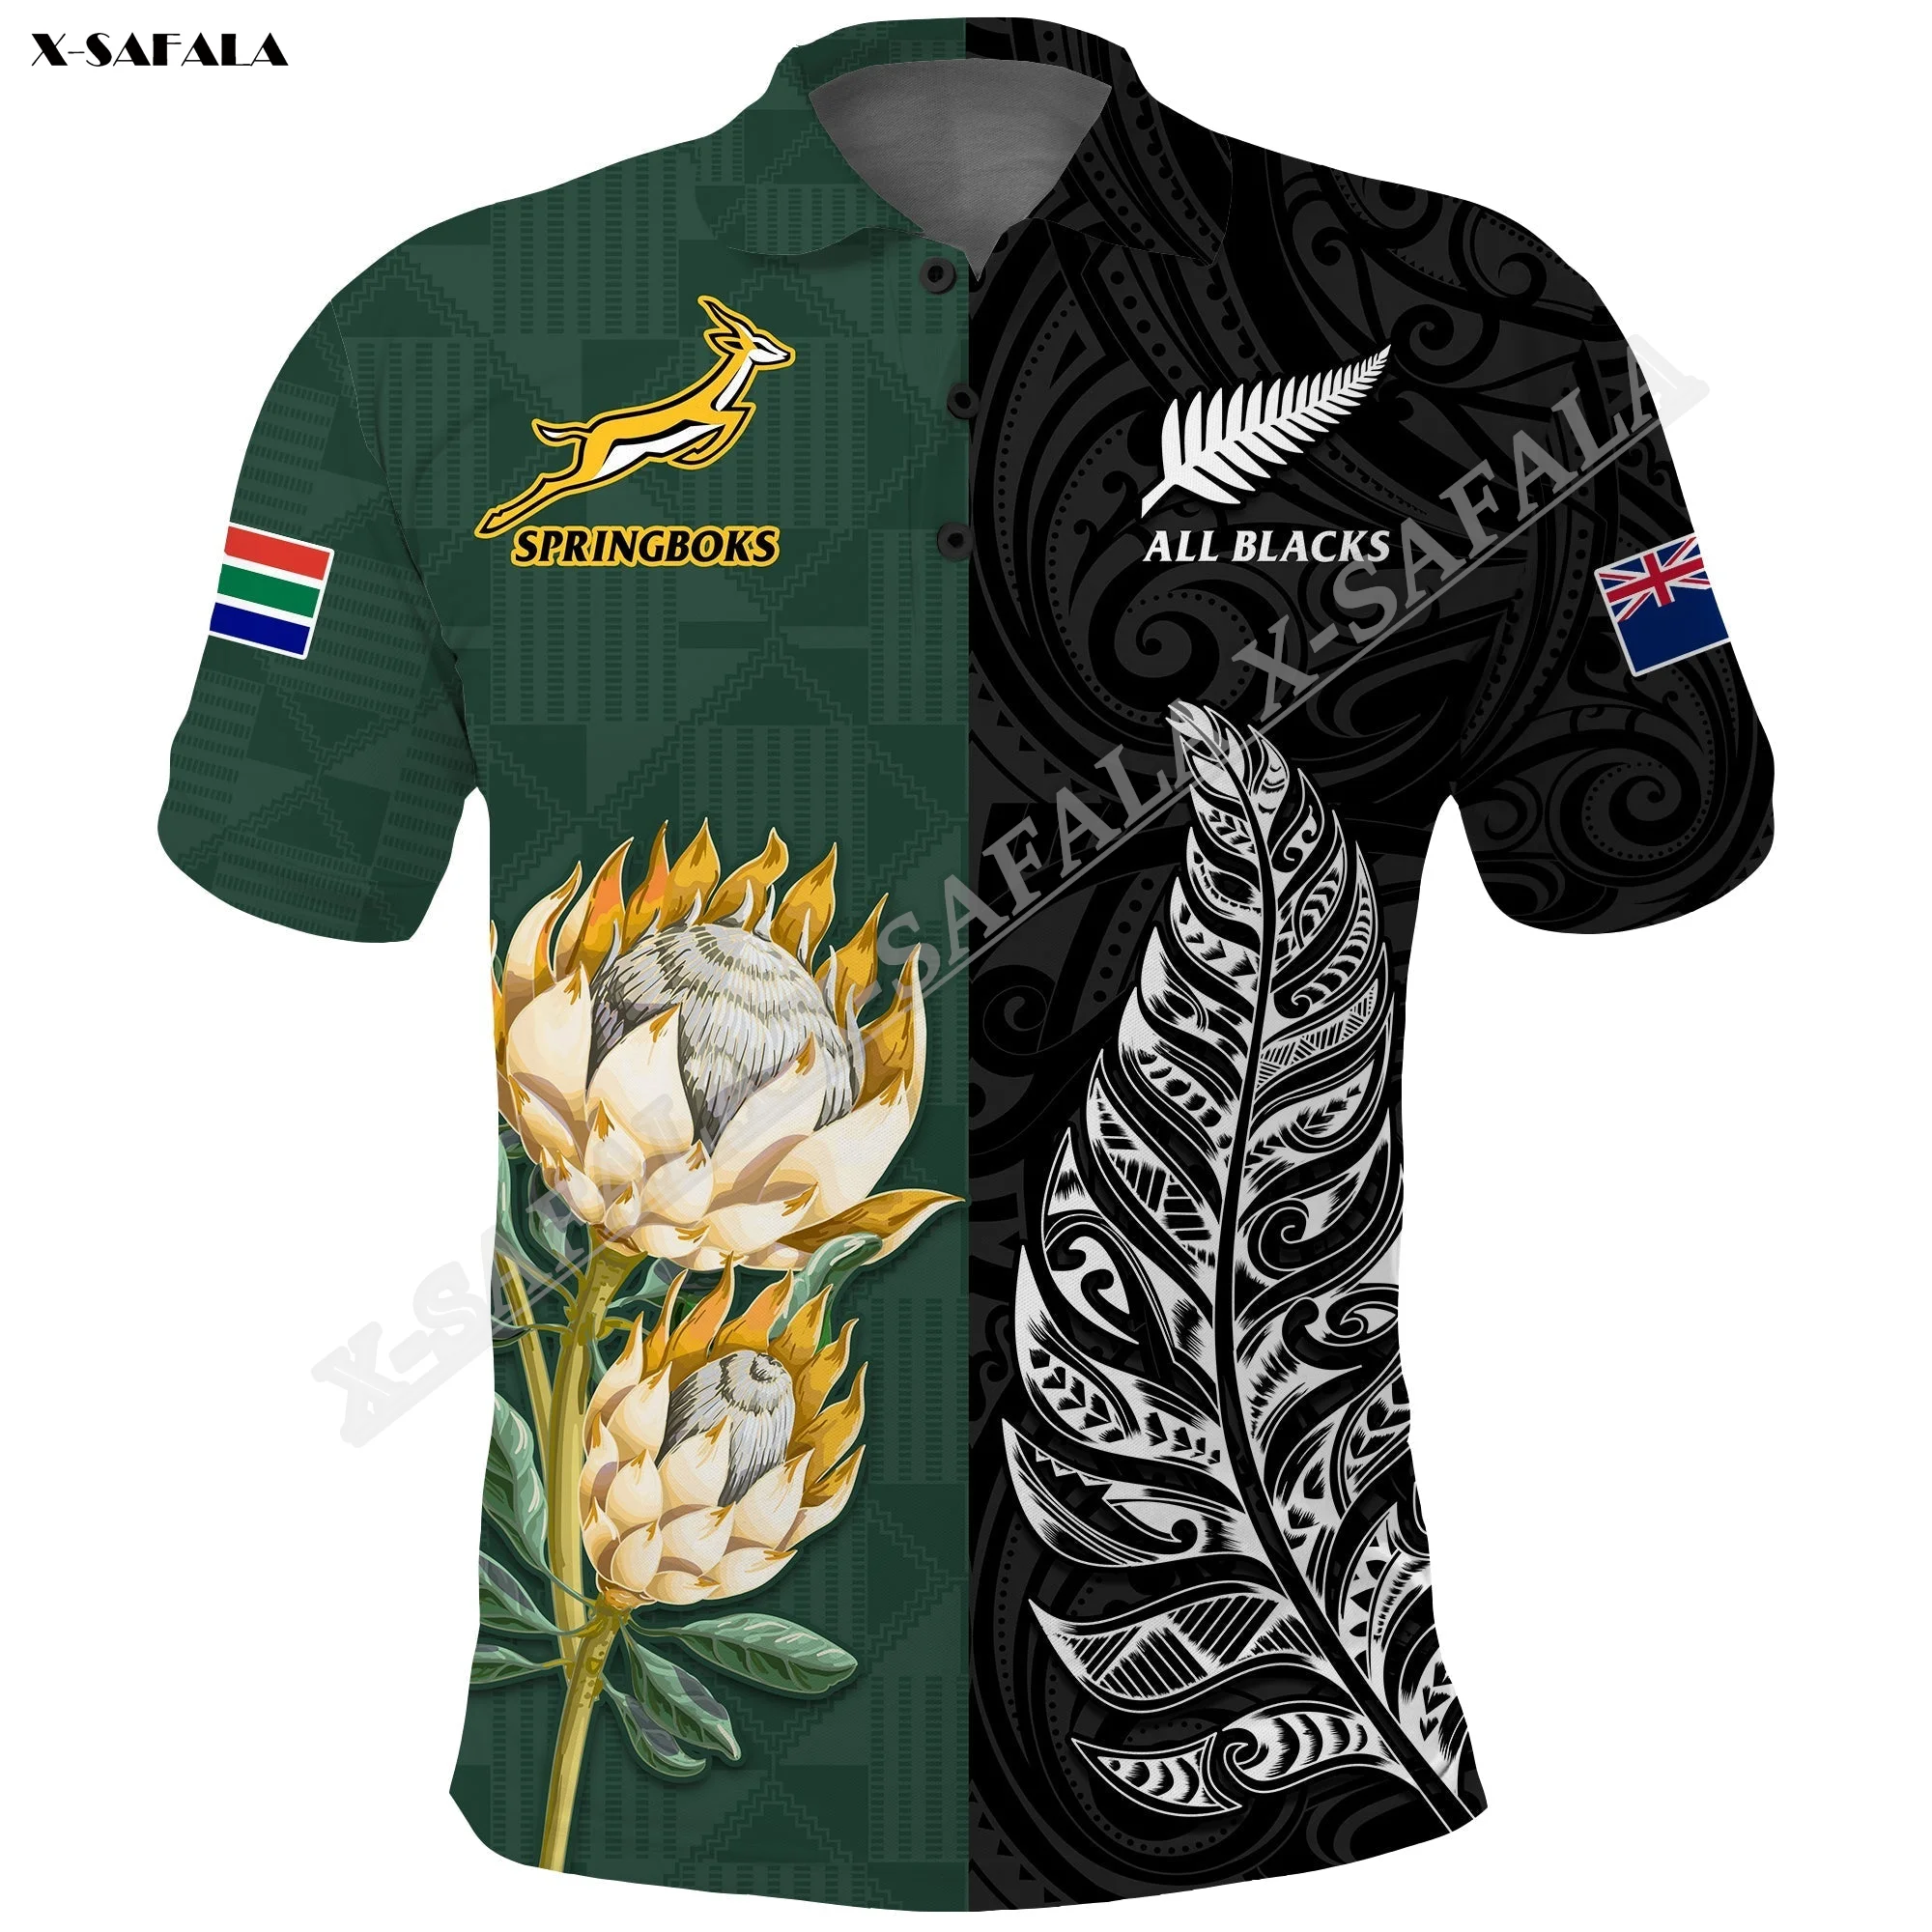 

South Africa Protea New Zealand Fern Rugby Go Springboks VS All Black 3D Printed For Men Polo Shirt Collar Short Sleeve Top Tee